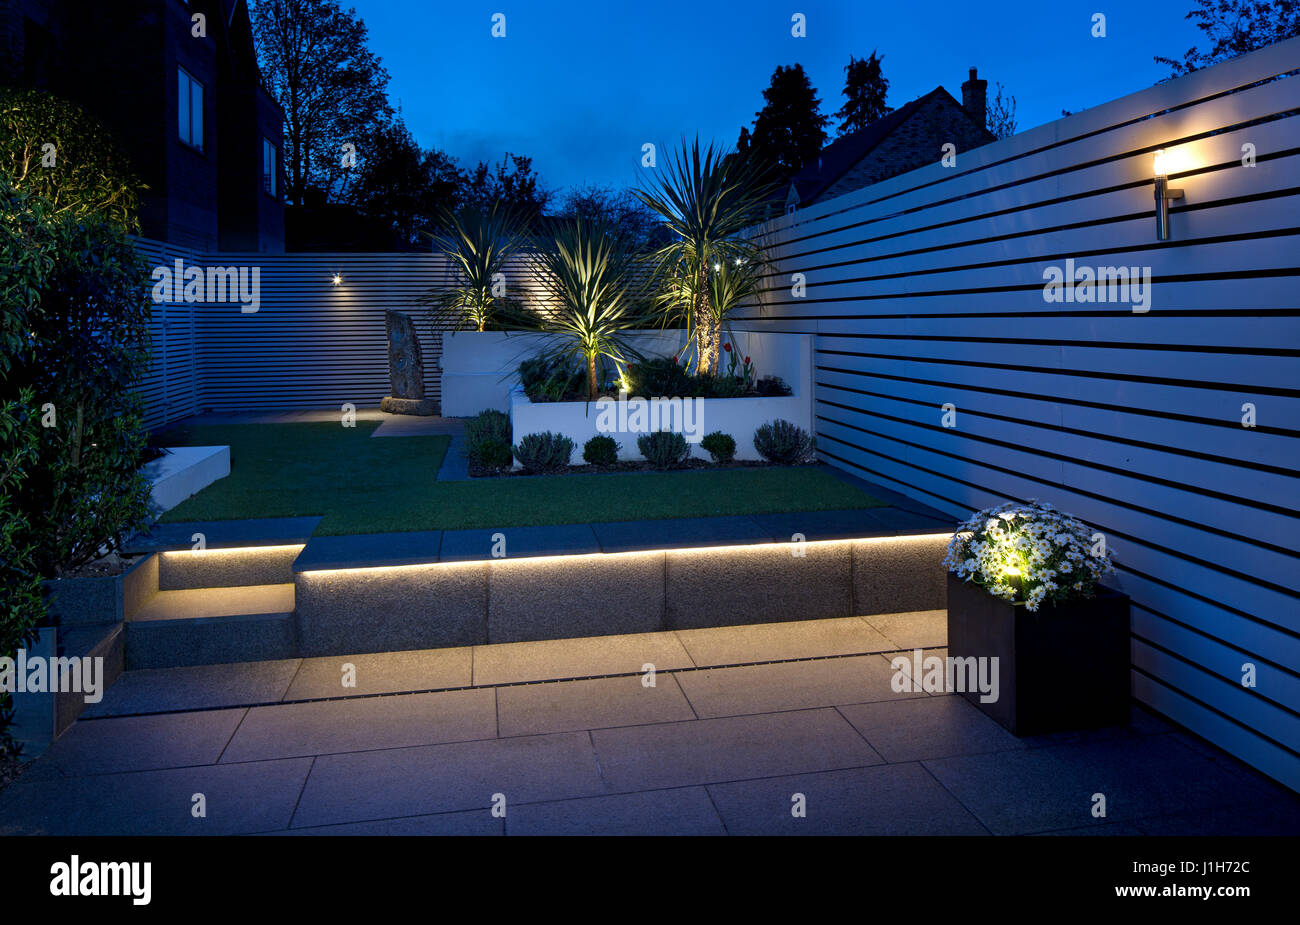 Modern Contemporary English garden with Wooden slated painted screen fence, fake grass and granite paving Stock Photo